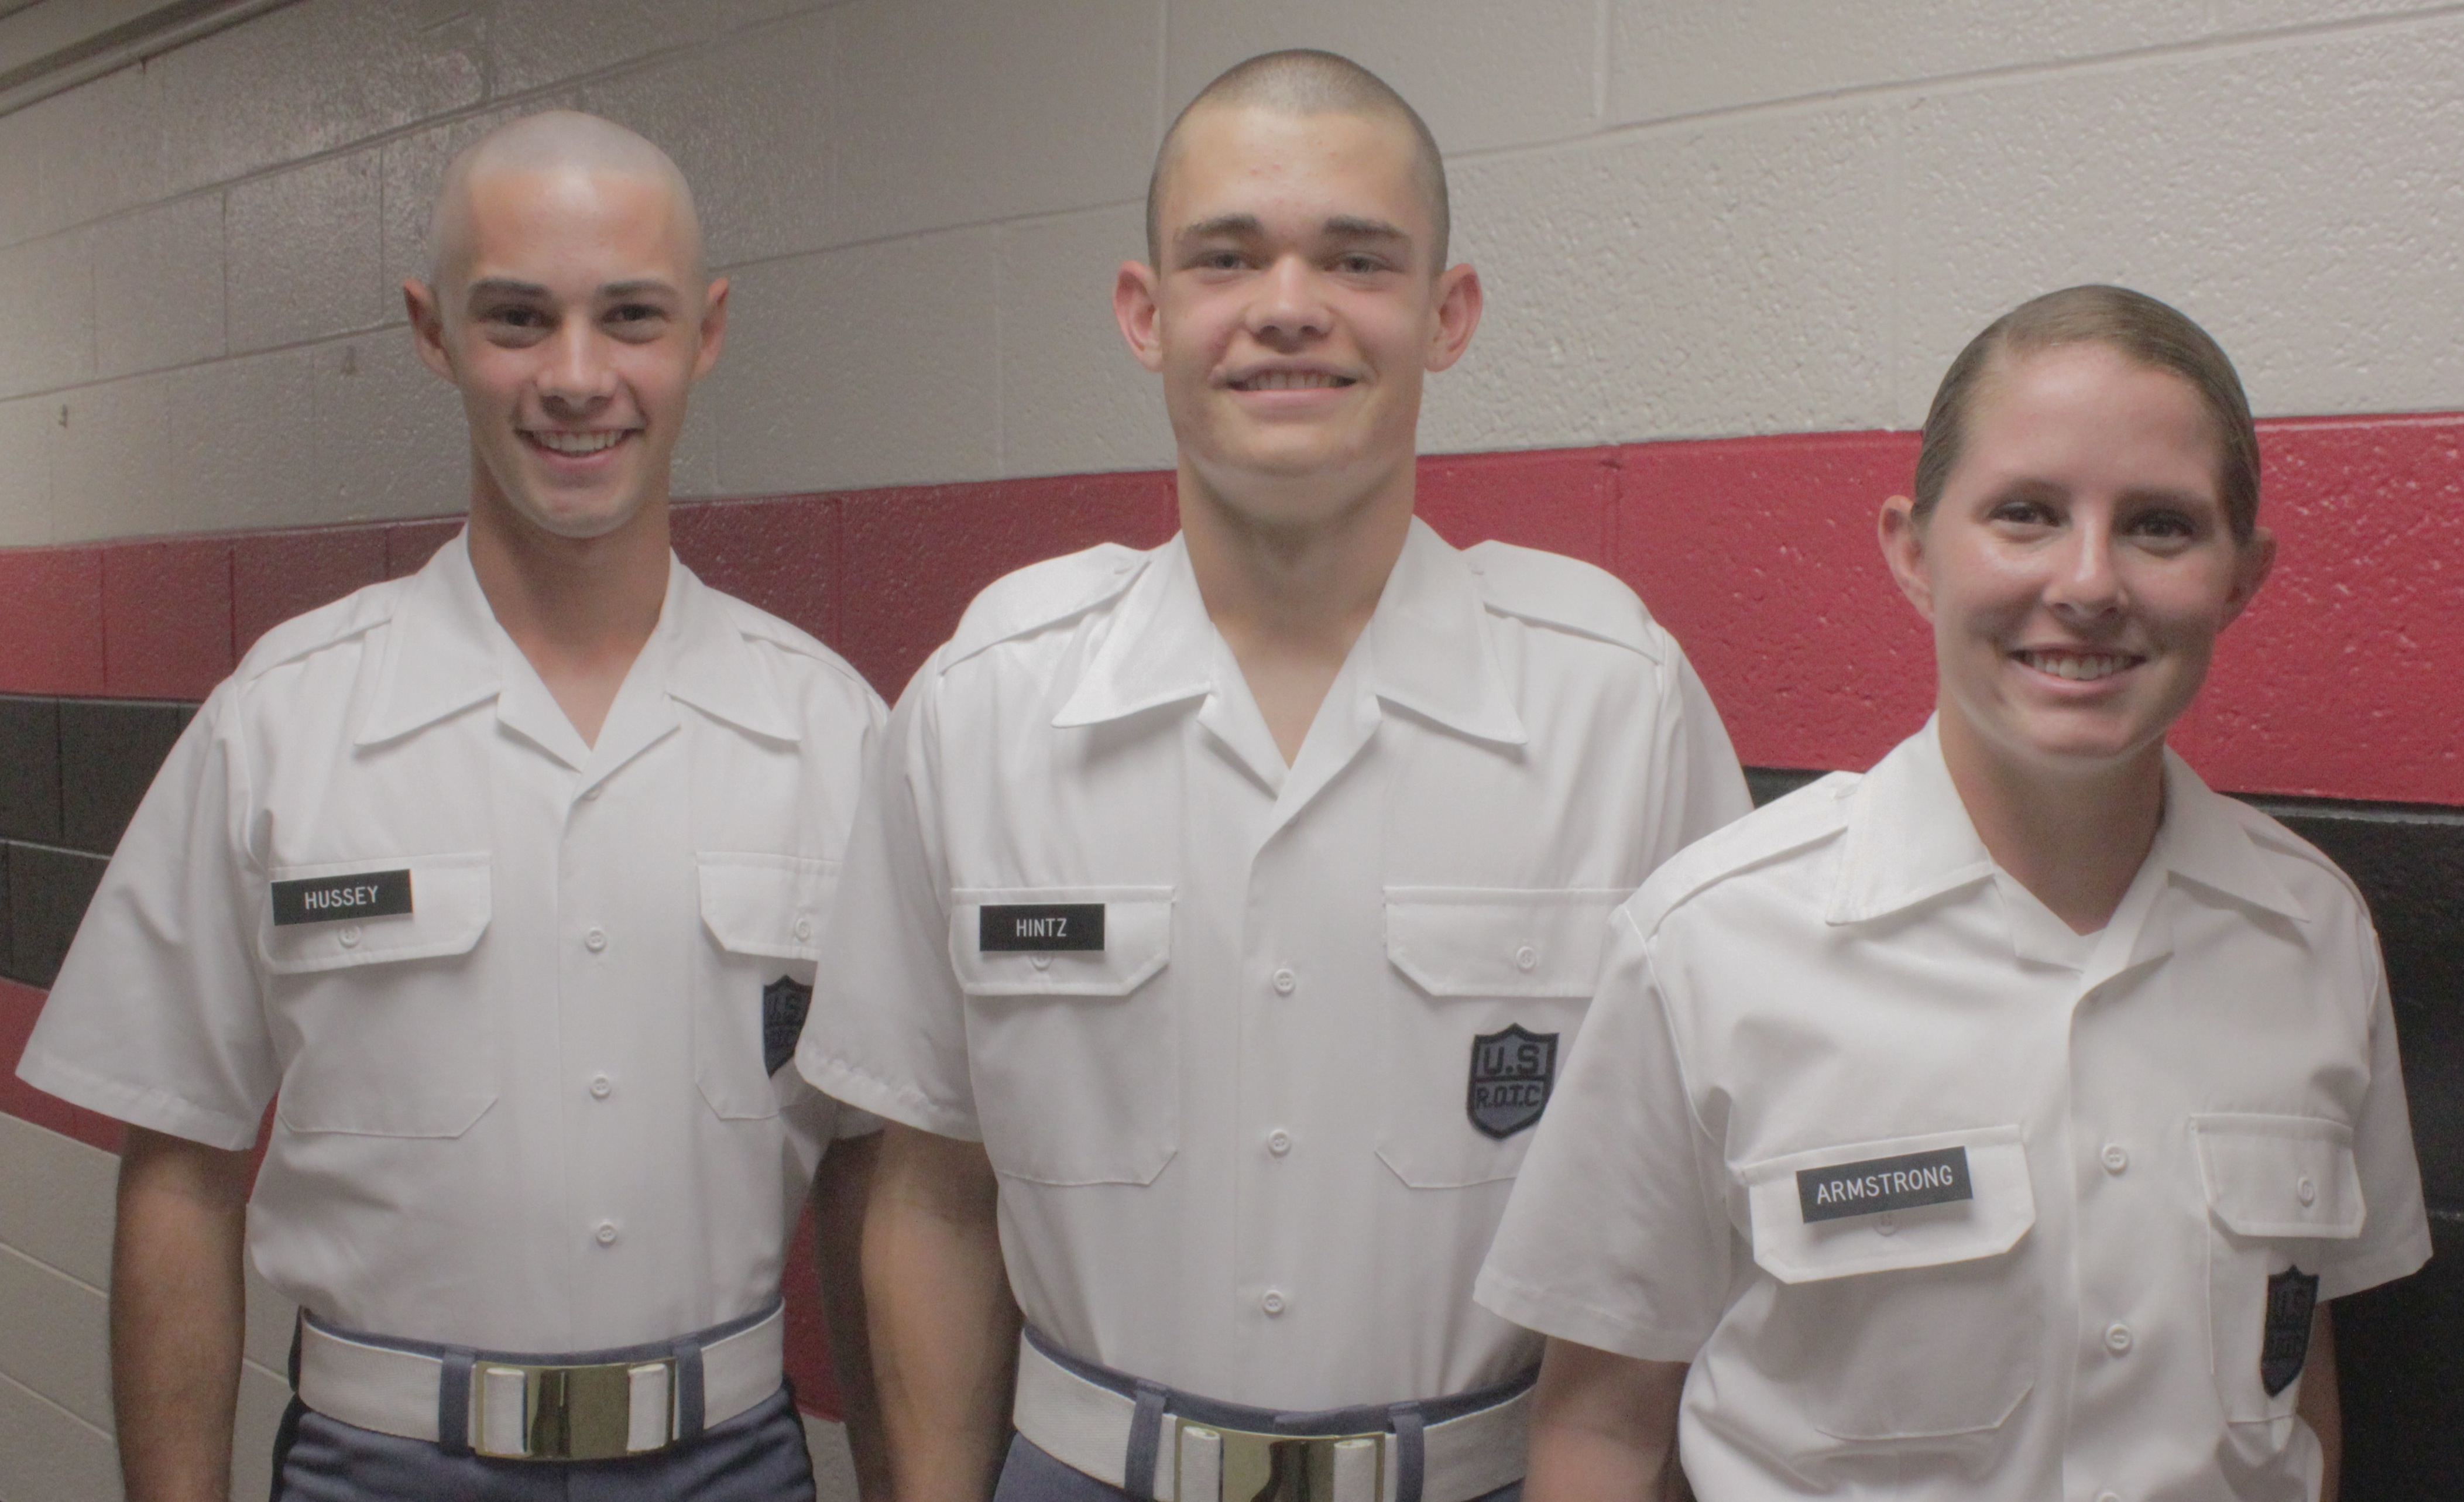 From left to right are Cadets Lawrence Hussey, Christopher Hintz, and Lisa Armstrong standing in Brodie Hall.